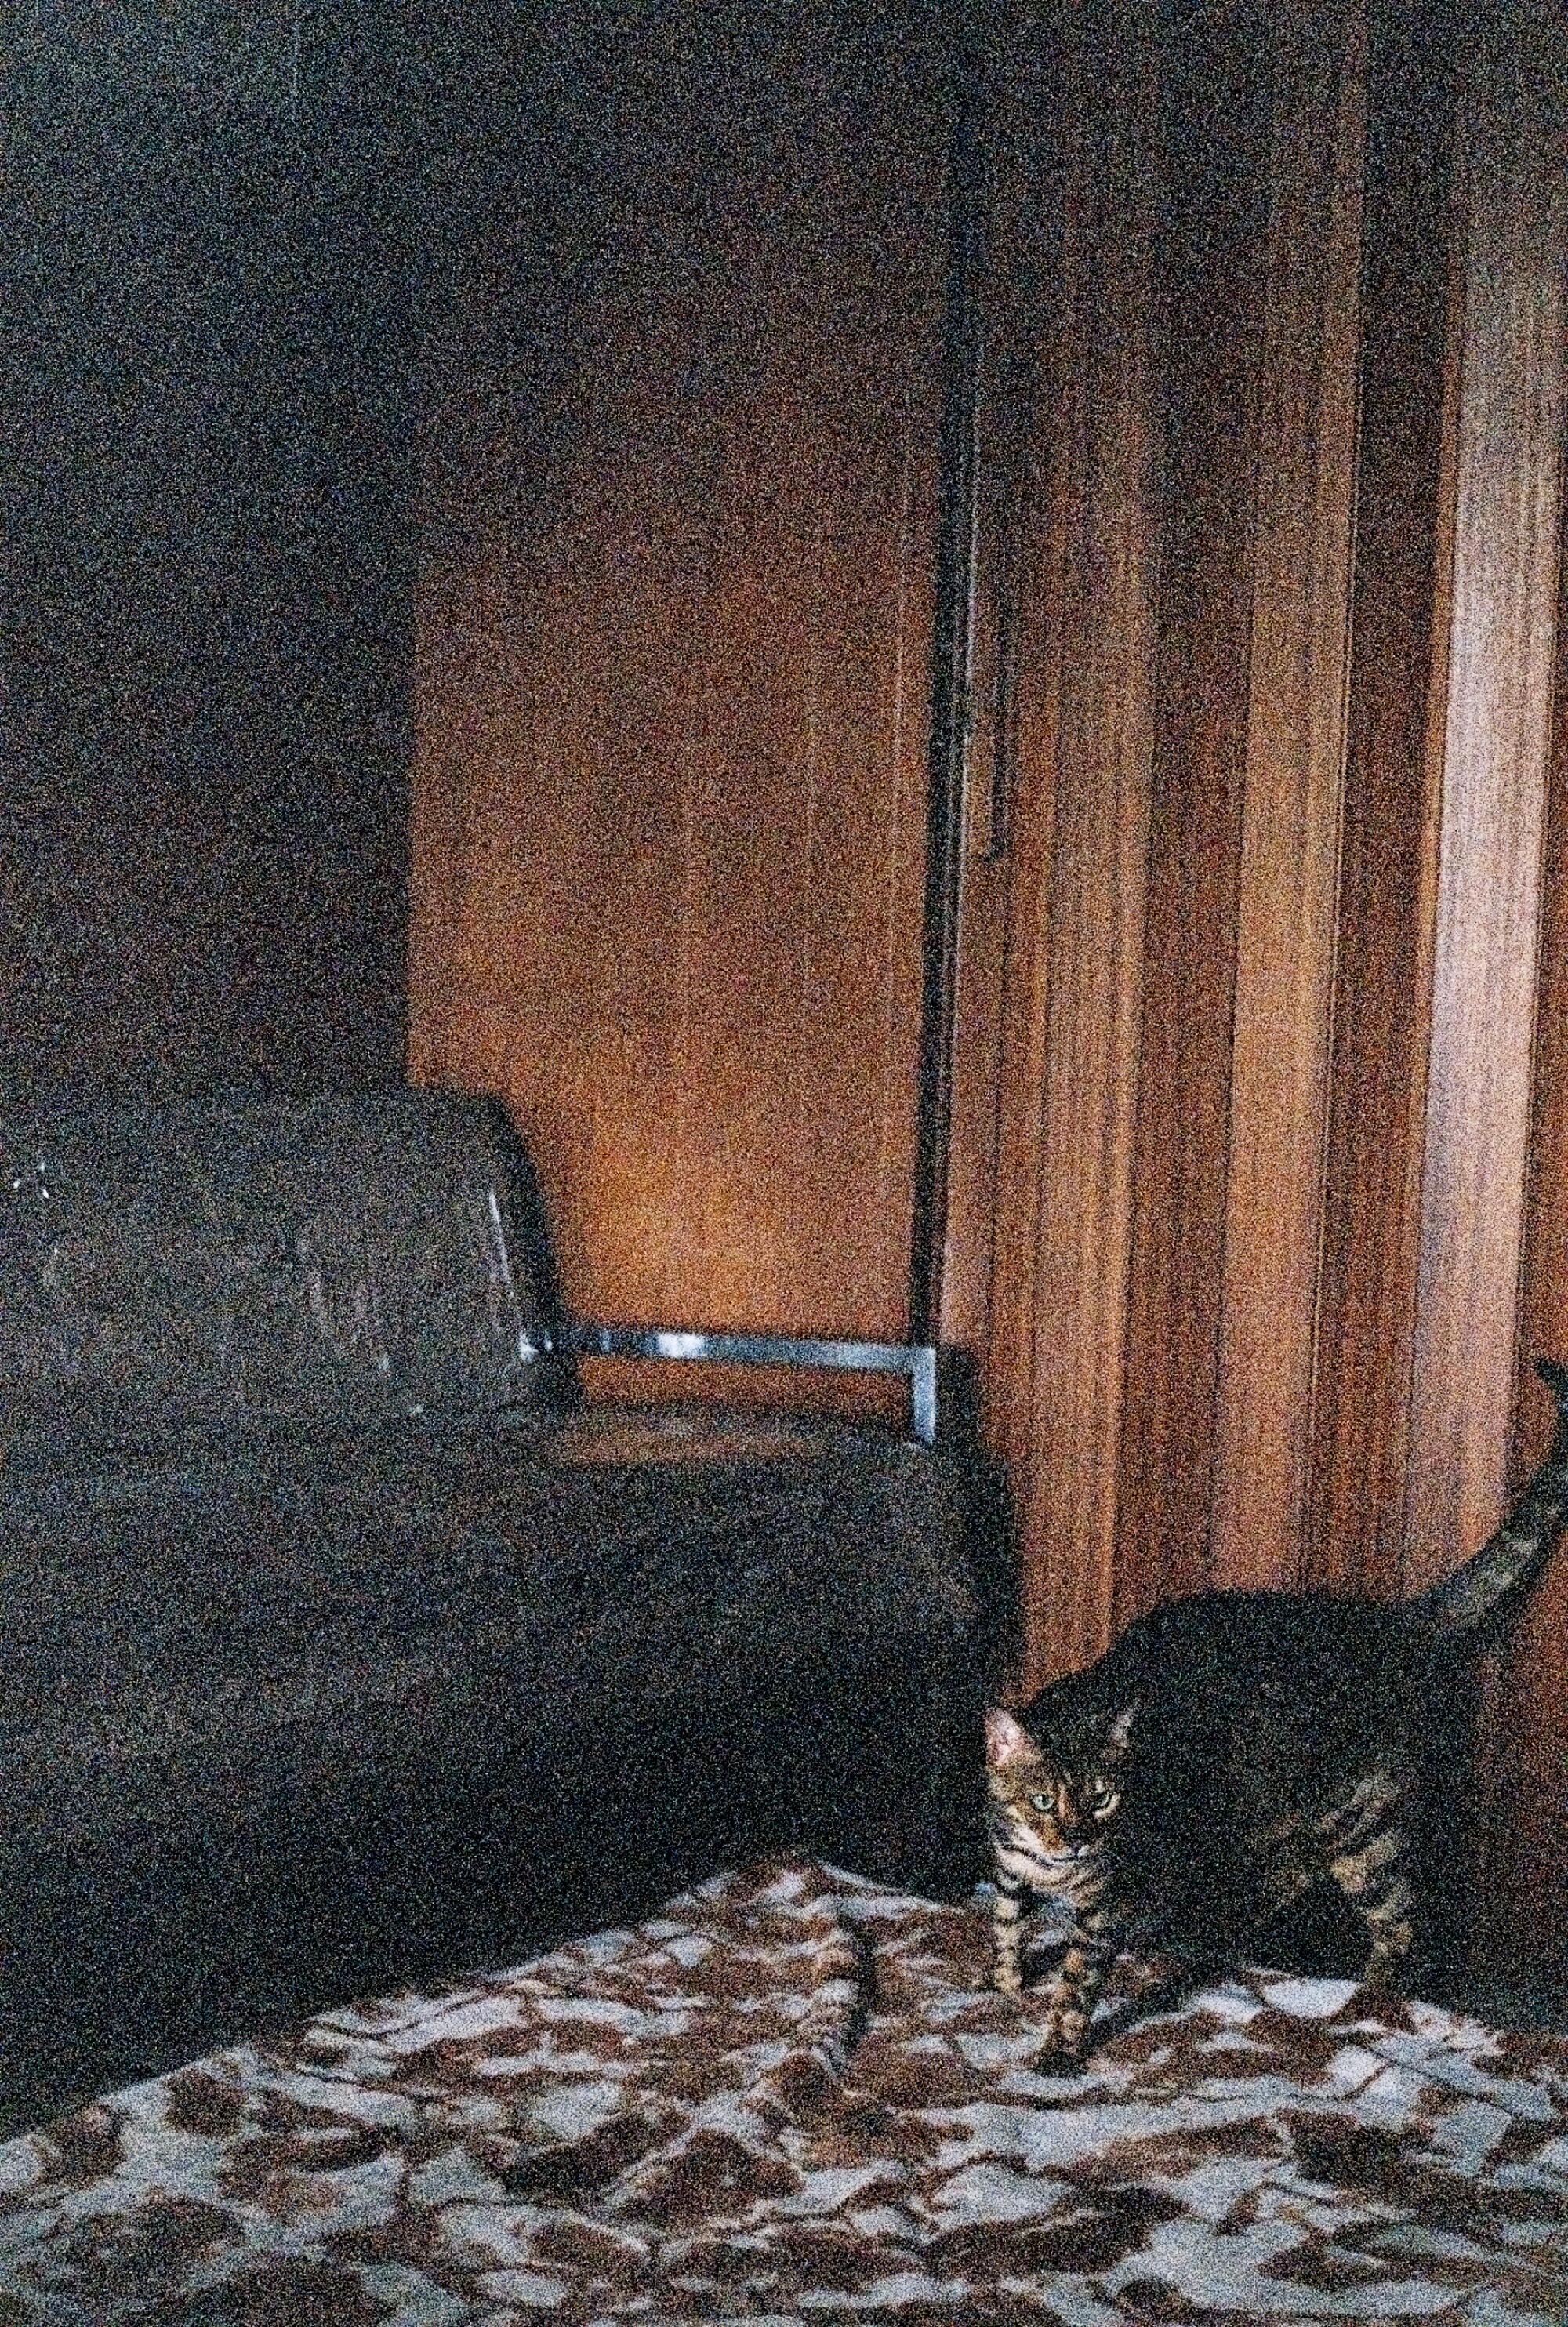 A photo of a plastic-covered couch, a cat beside it.